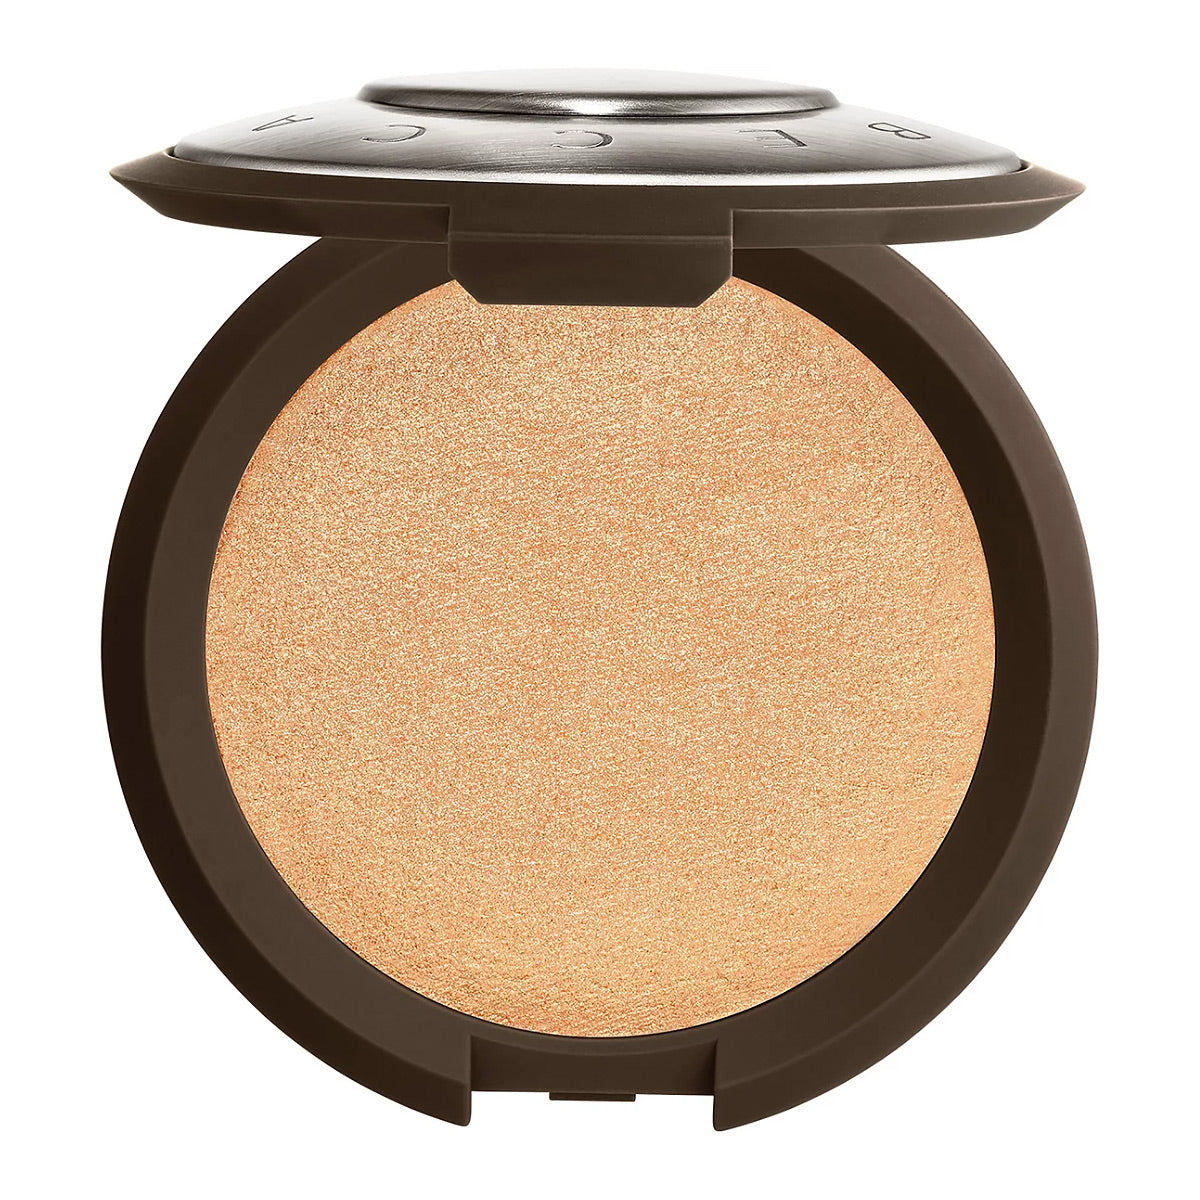 Smashbox X BECCA Shimmering Skin Perfector Pressed Highlighter | Champagne Pop